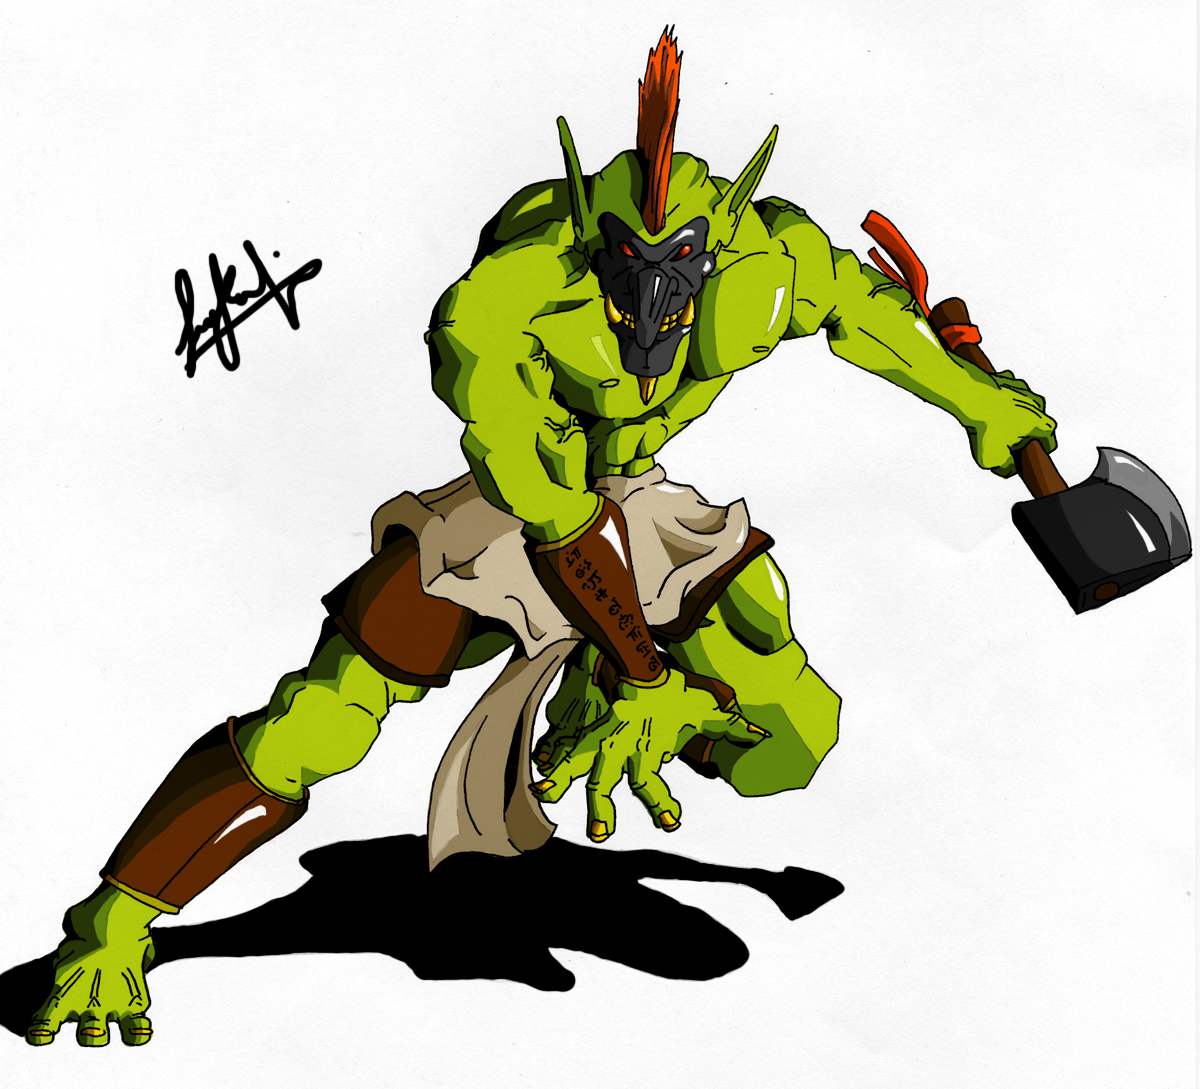 DOTA Series 1: Mortred by 1nsAn3ss-Th3-aX on DeviantArt